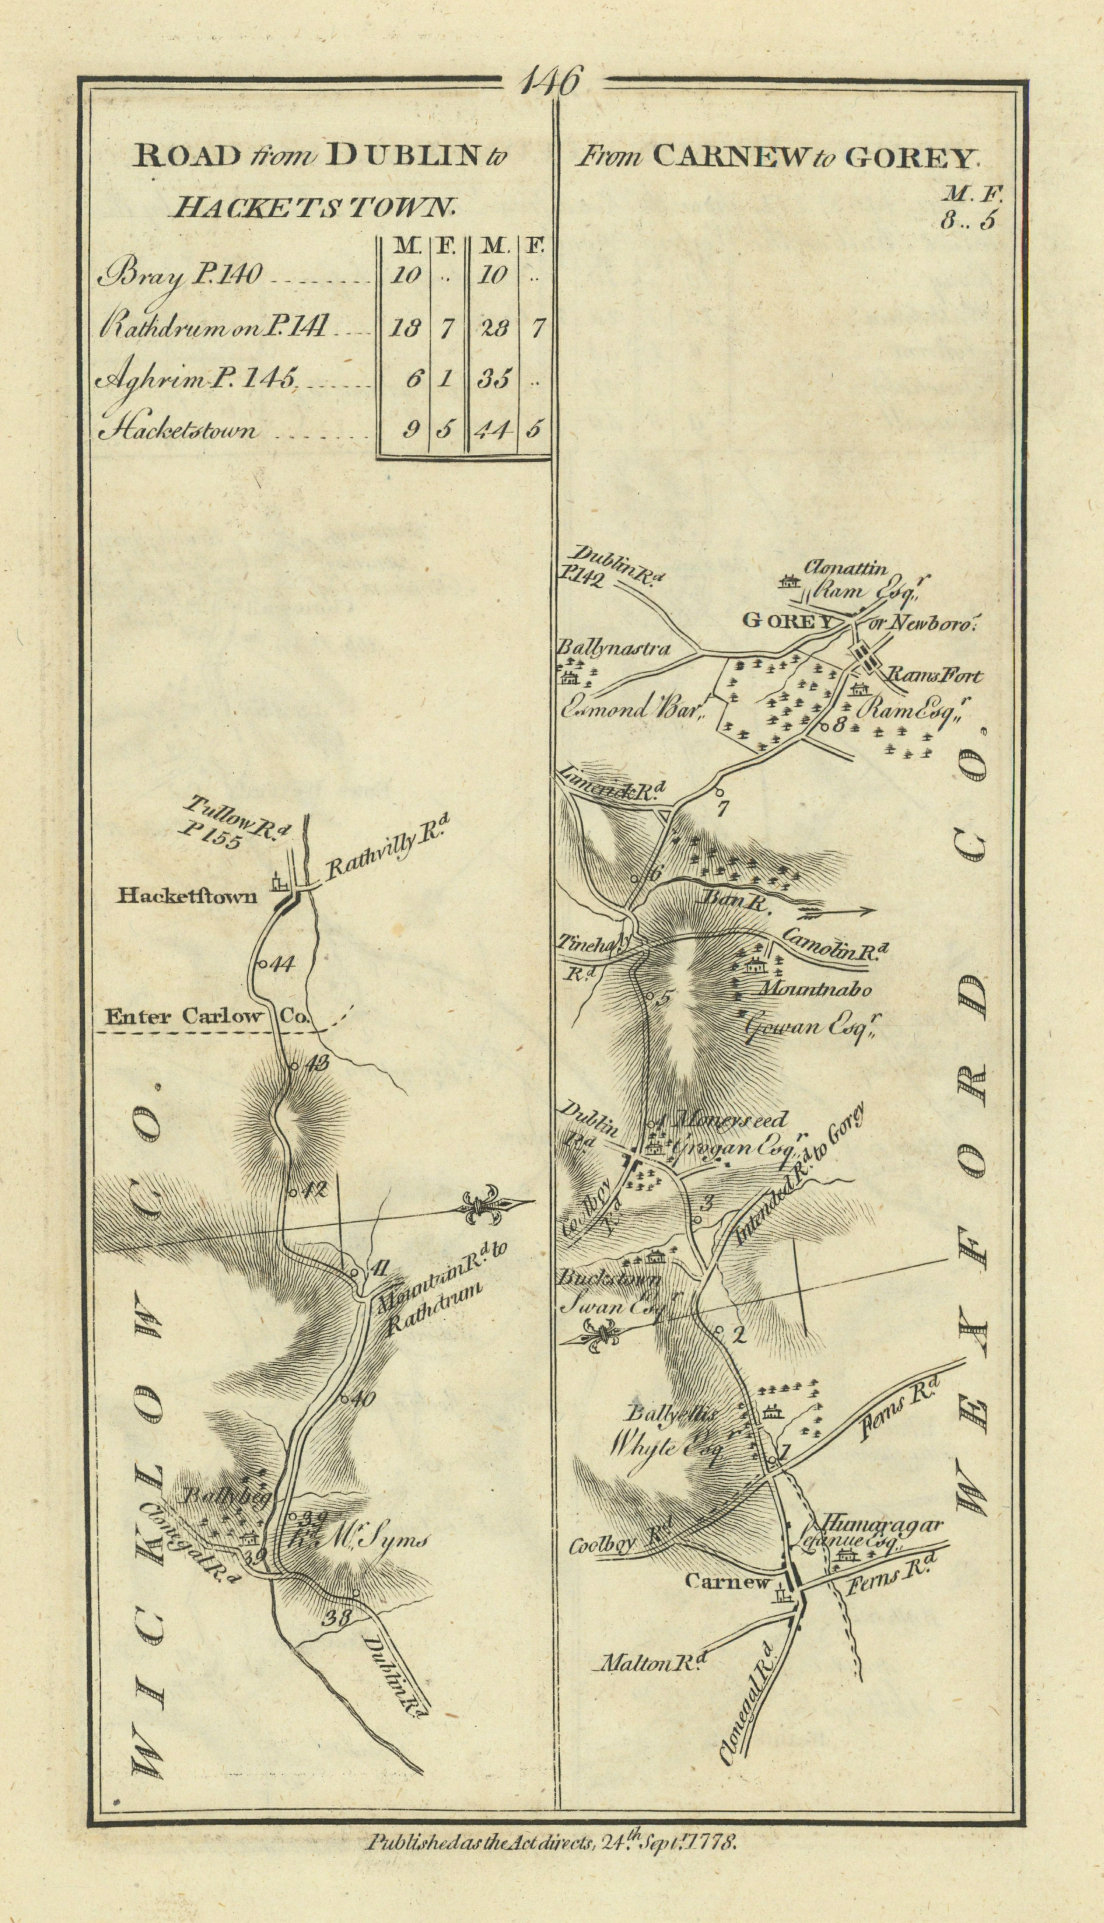 #146 Dublin to Hacketstown / Carnew to Gorey. Wicklow. TAYLOR/SKINNER 1778 map